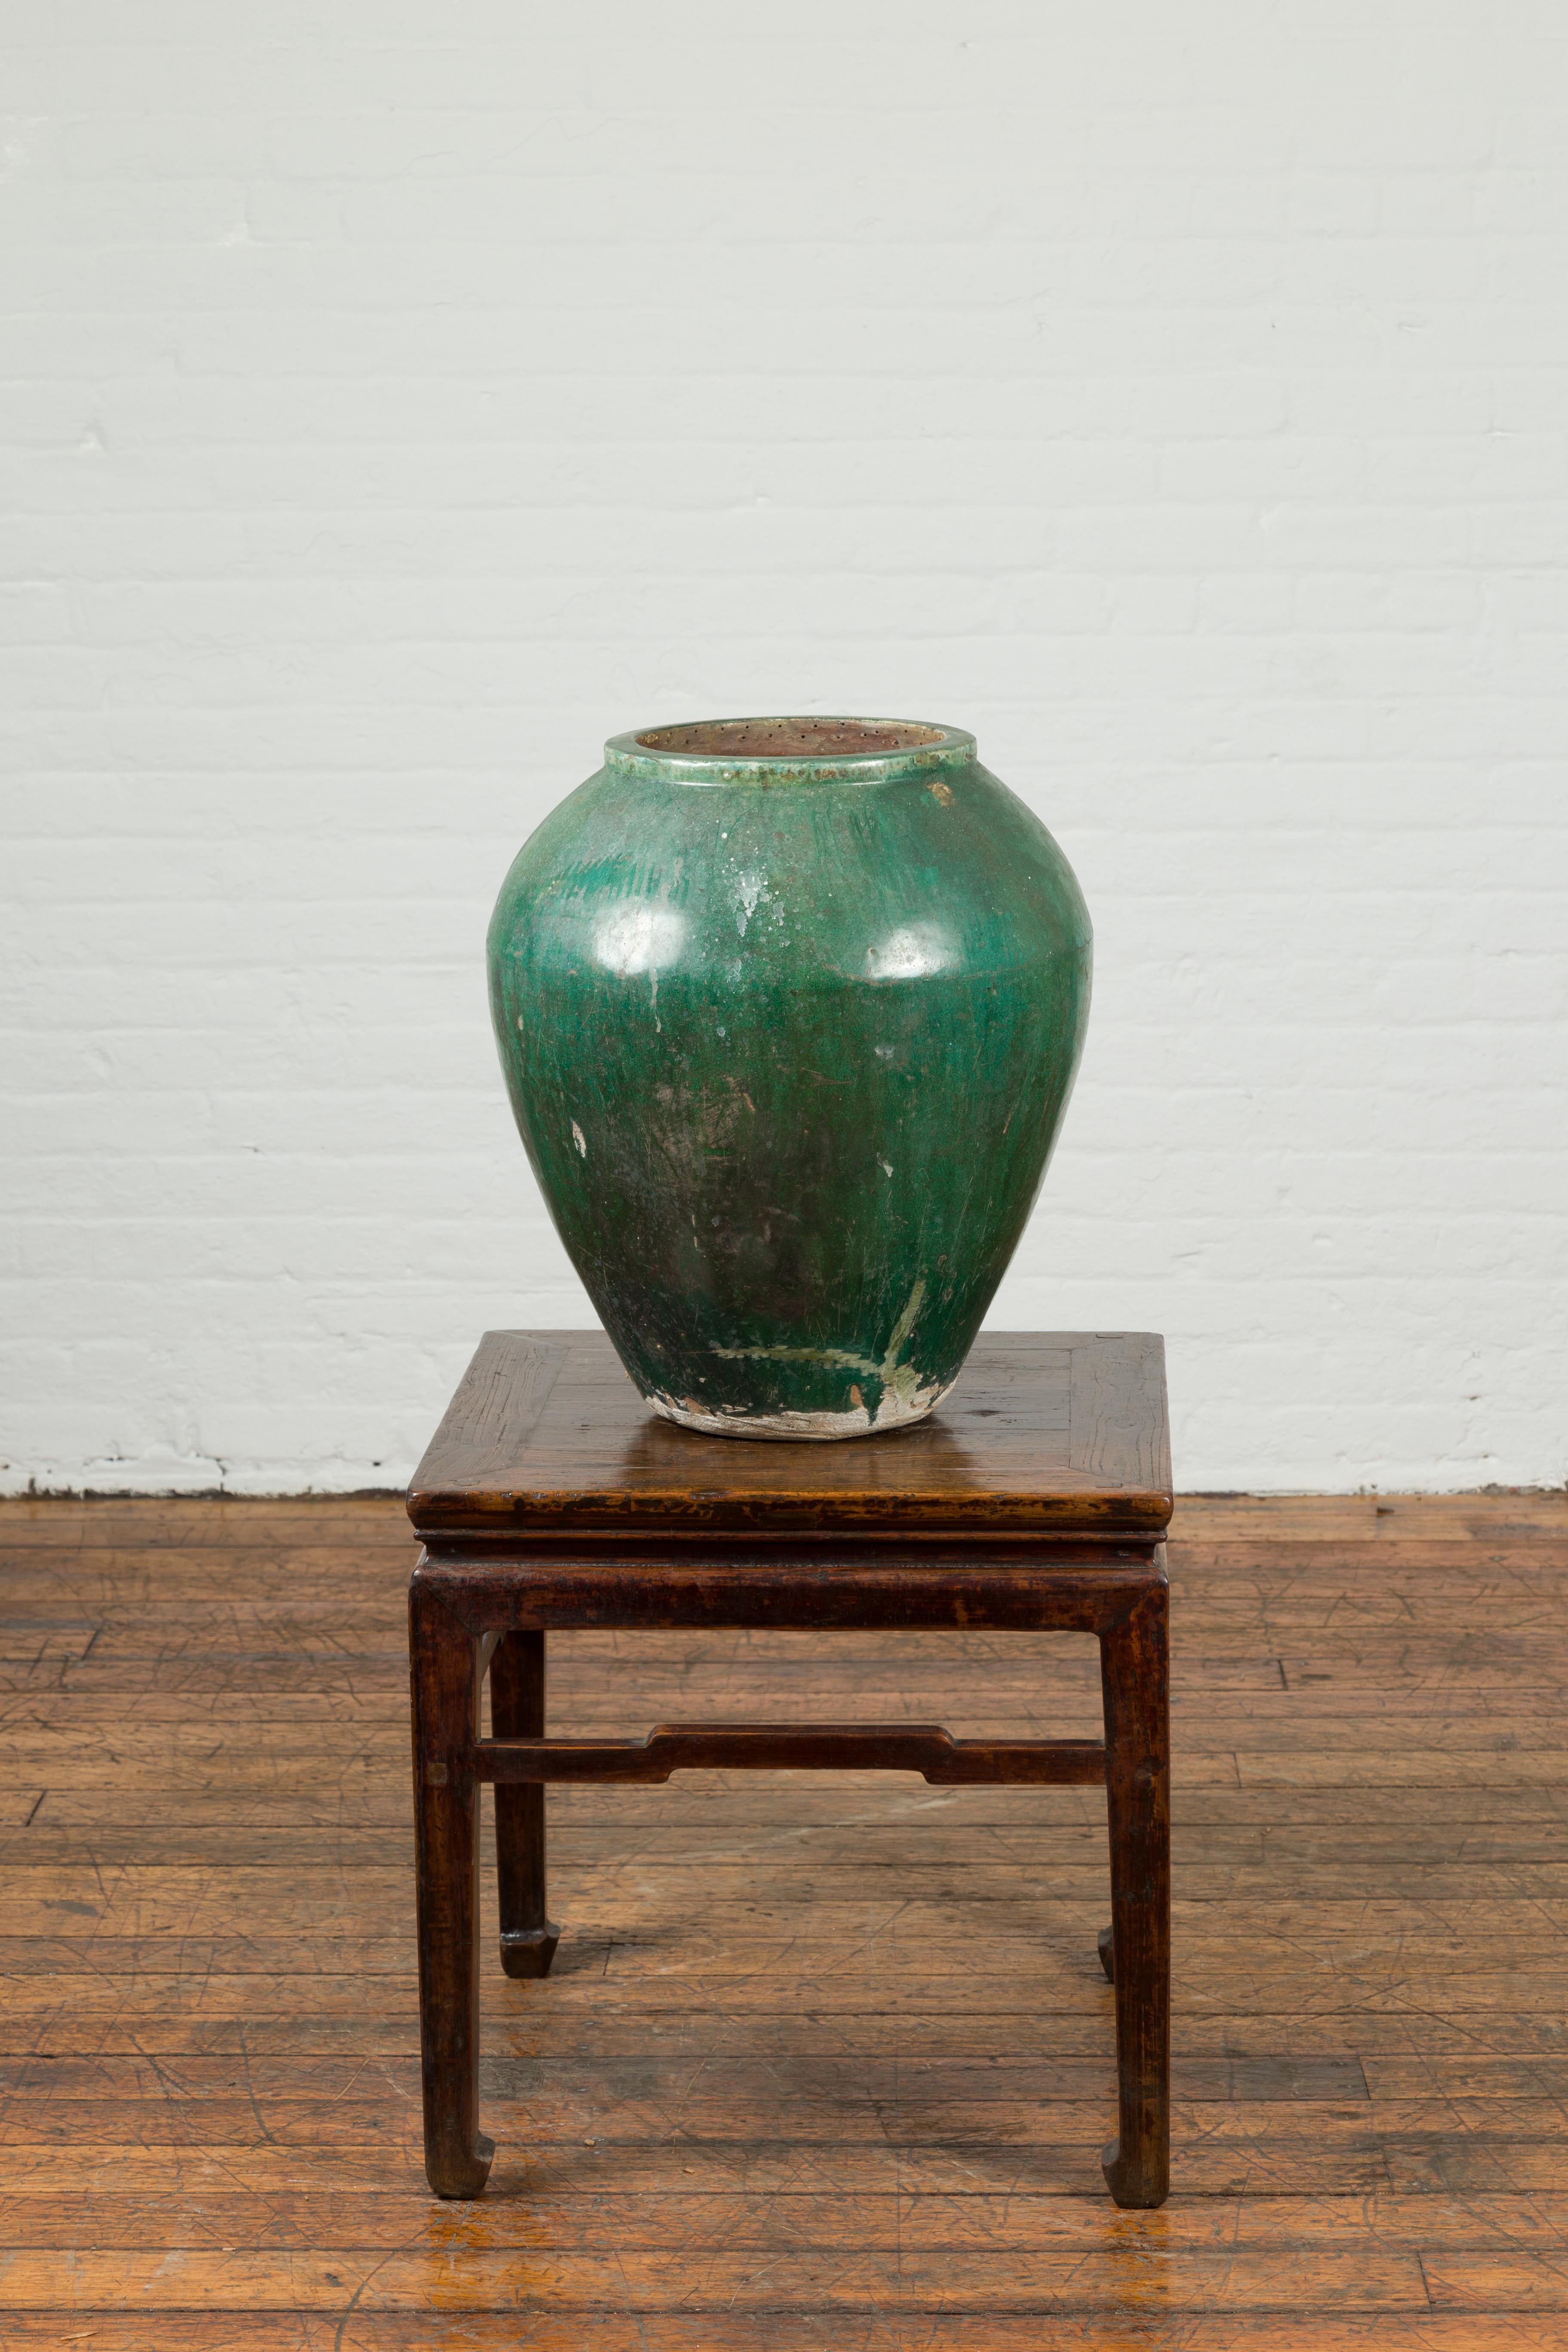 20th Century Chinese Vintage Water Jar with Verde Patina and Weathered Appearance